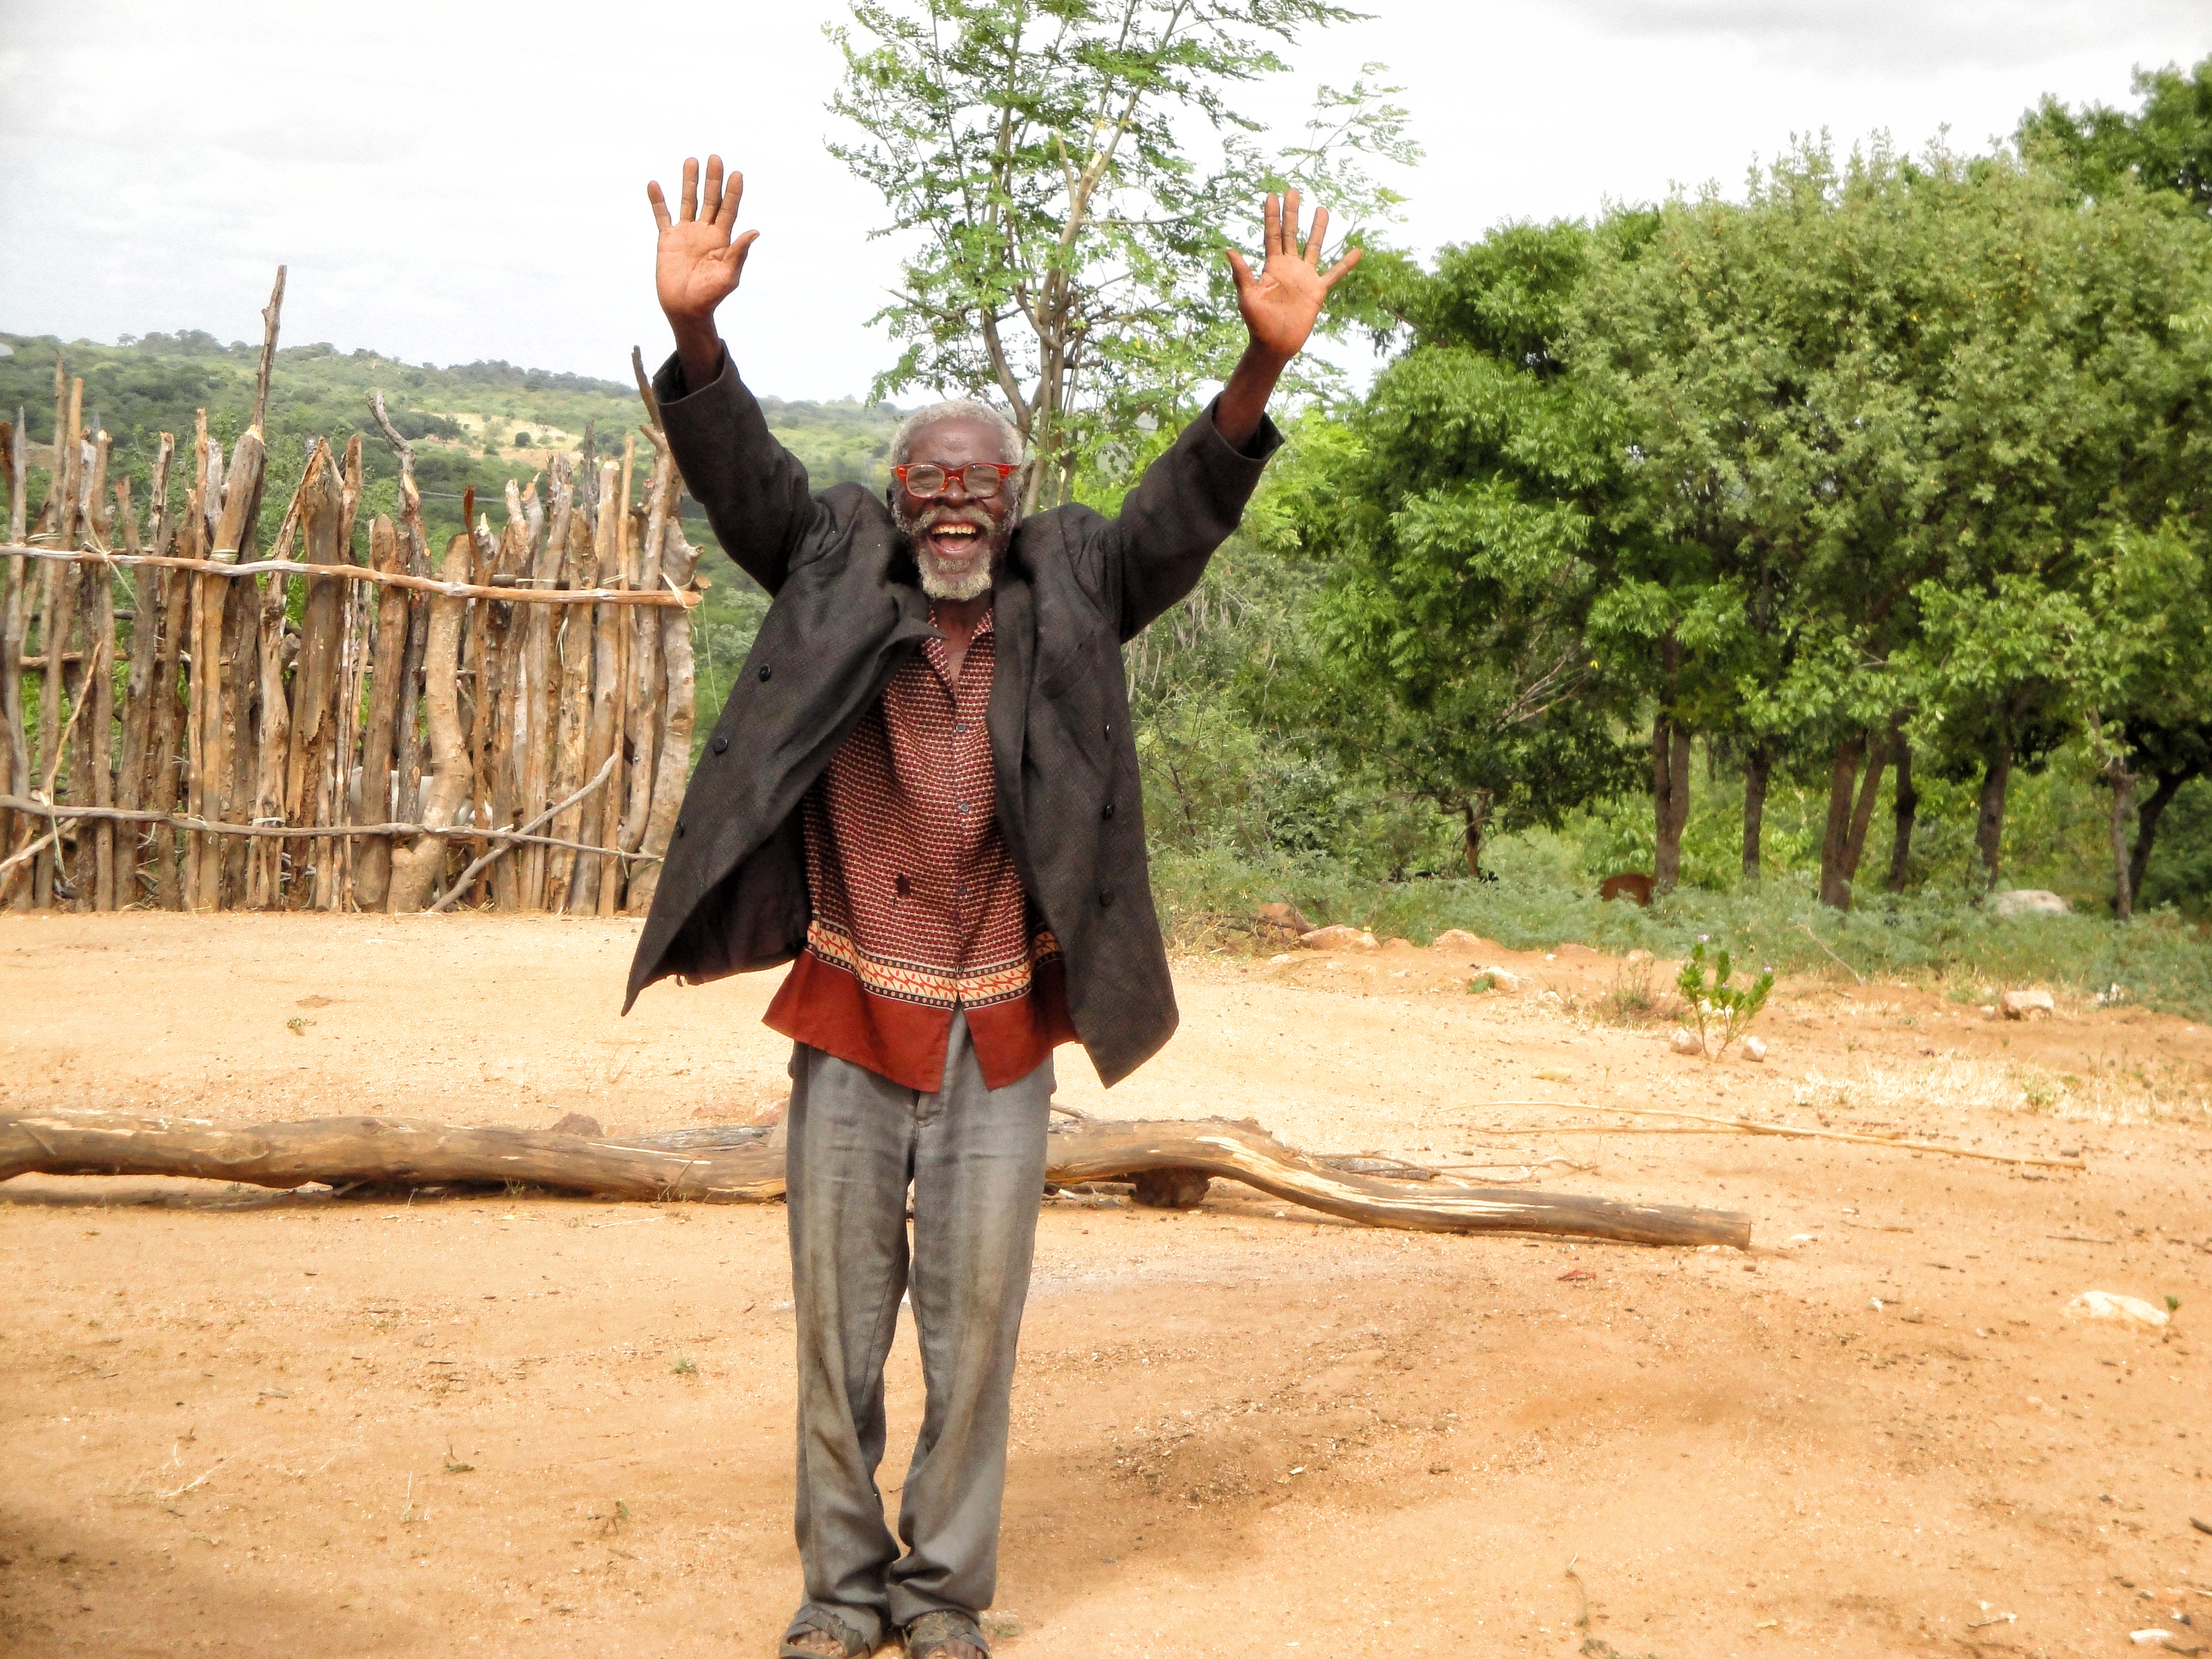 An older man raises his hands with happiness in Mozambique.